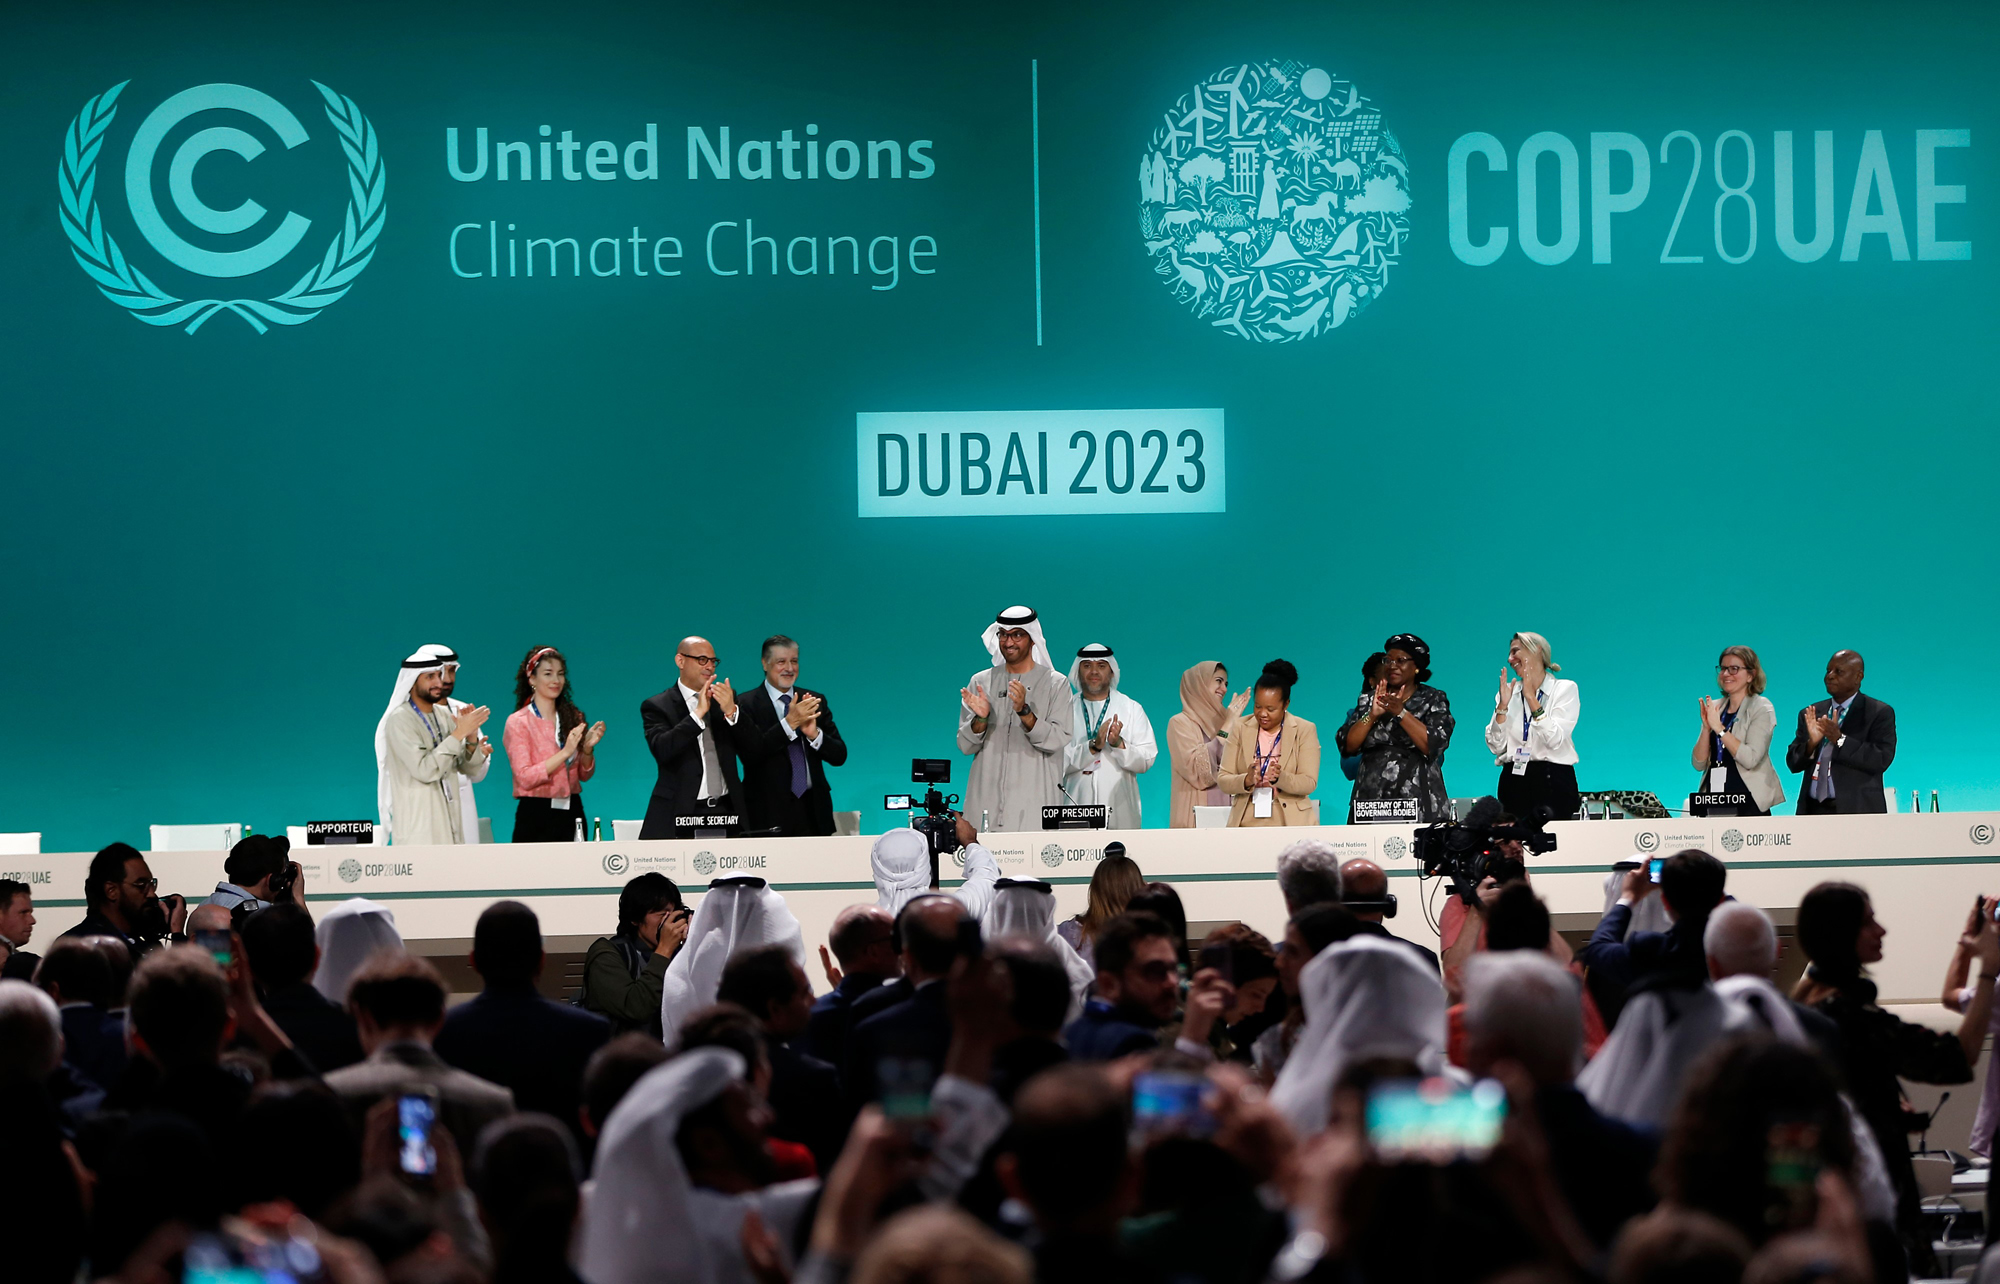 Attendees applaud after announcement of UAE consensus during a closing plenary of COP28 on Dec. 13. Credit: Wang Dongzhen/Xinhua via Getty Images